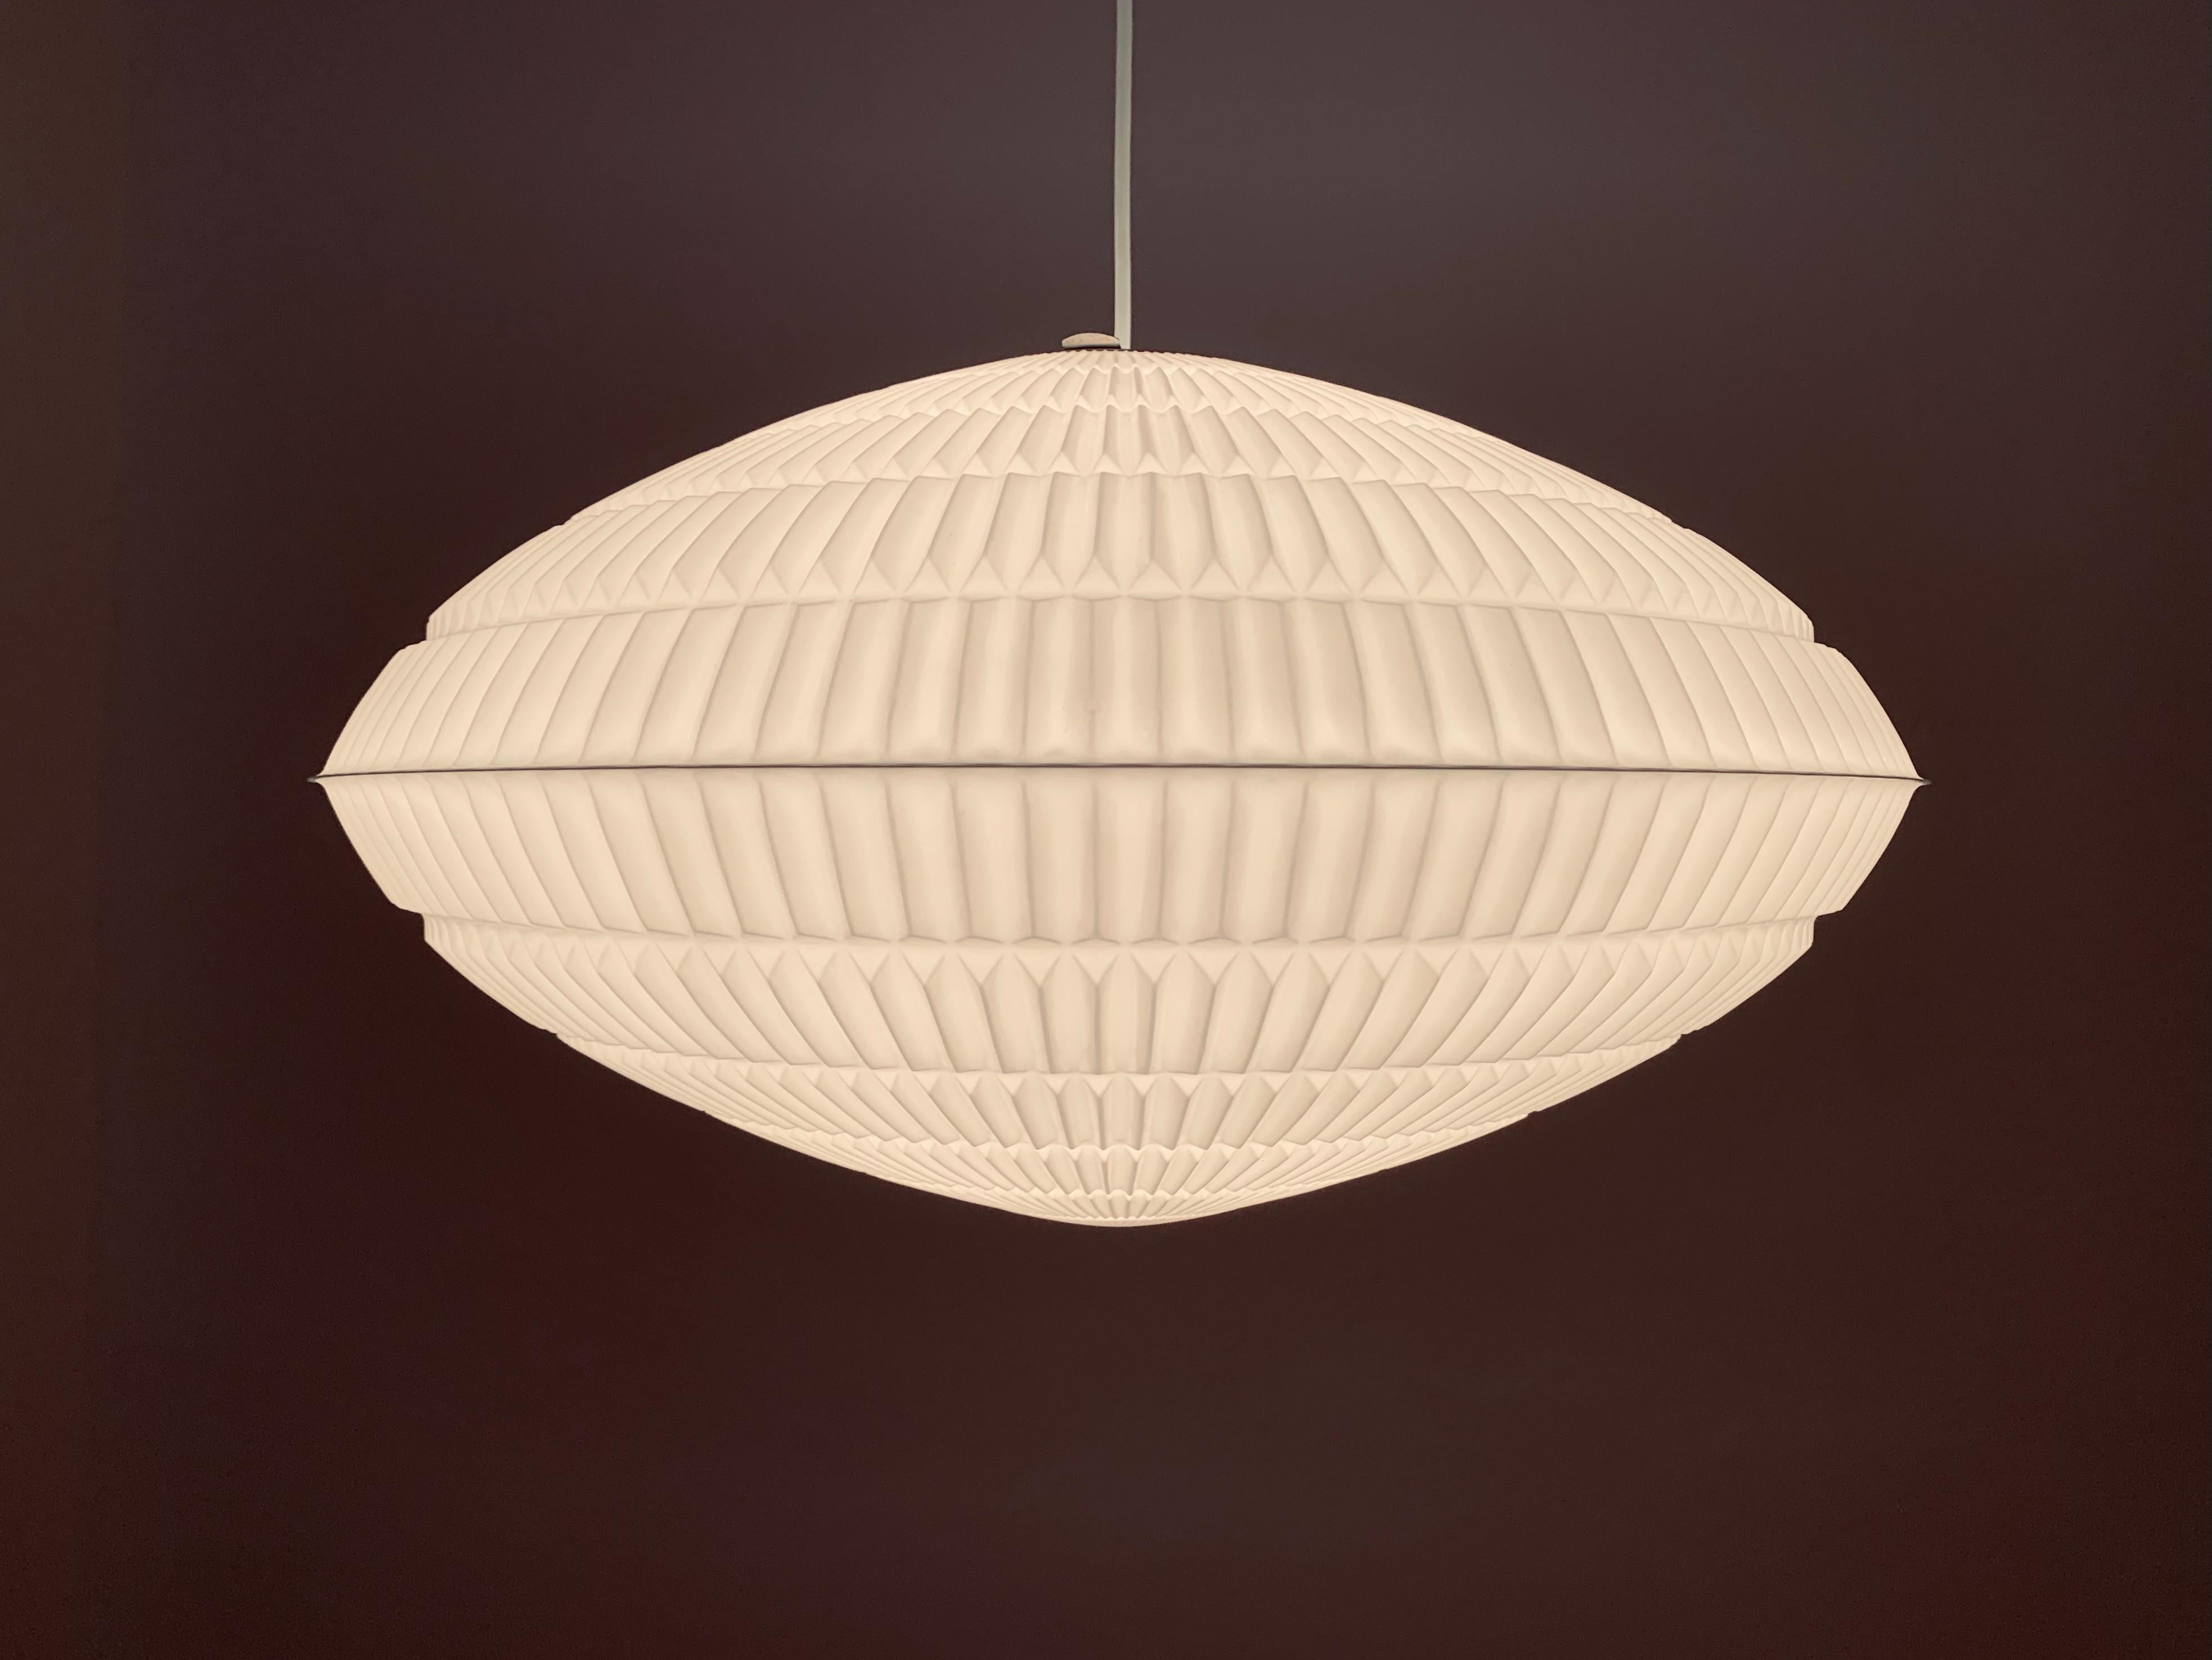  Origami pendant lamp by Aloys Gangkofner for Erco For Sale 4